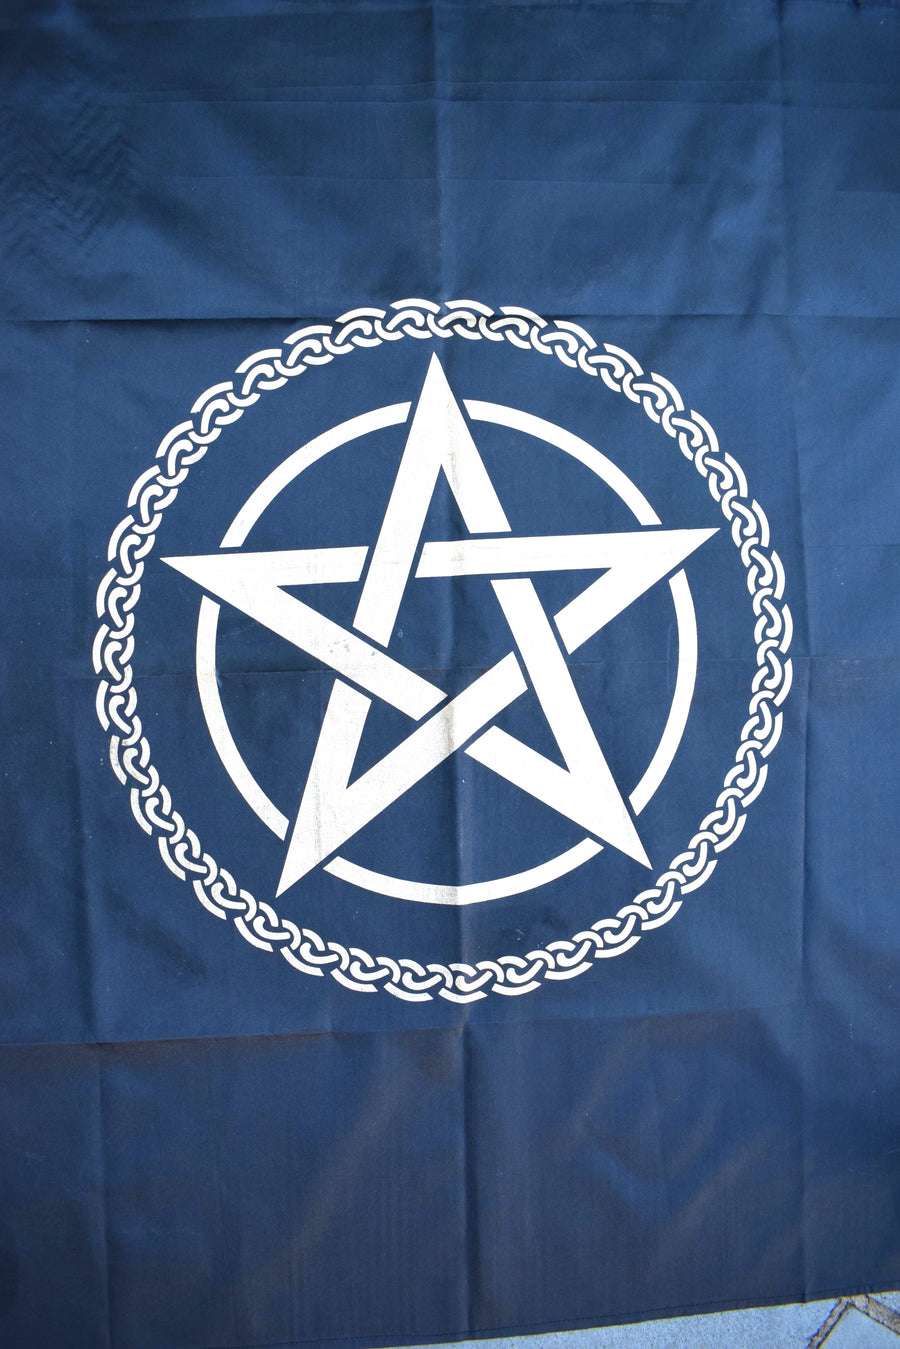 A black satin altar cloth or witches flag with gold pentagram pentacle in the middle encircled by a celtic knot